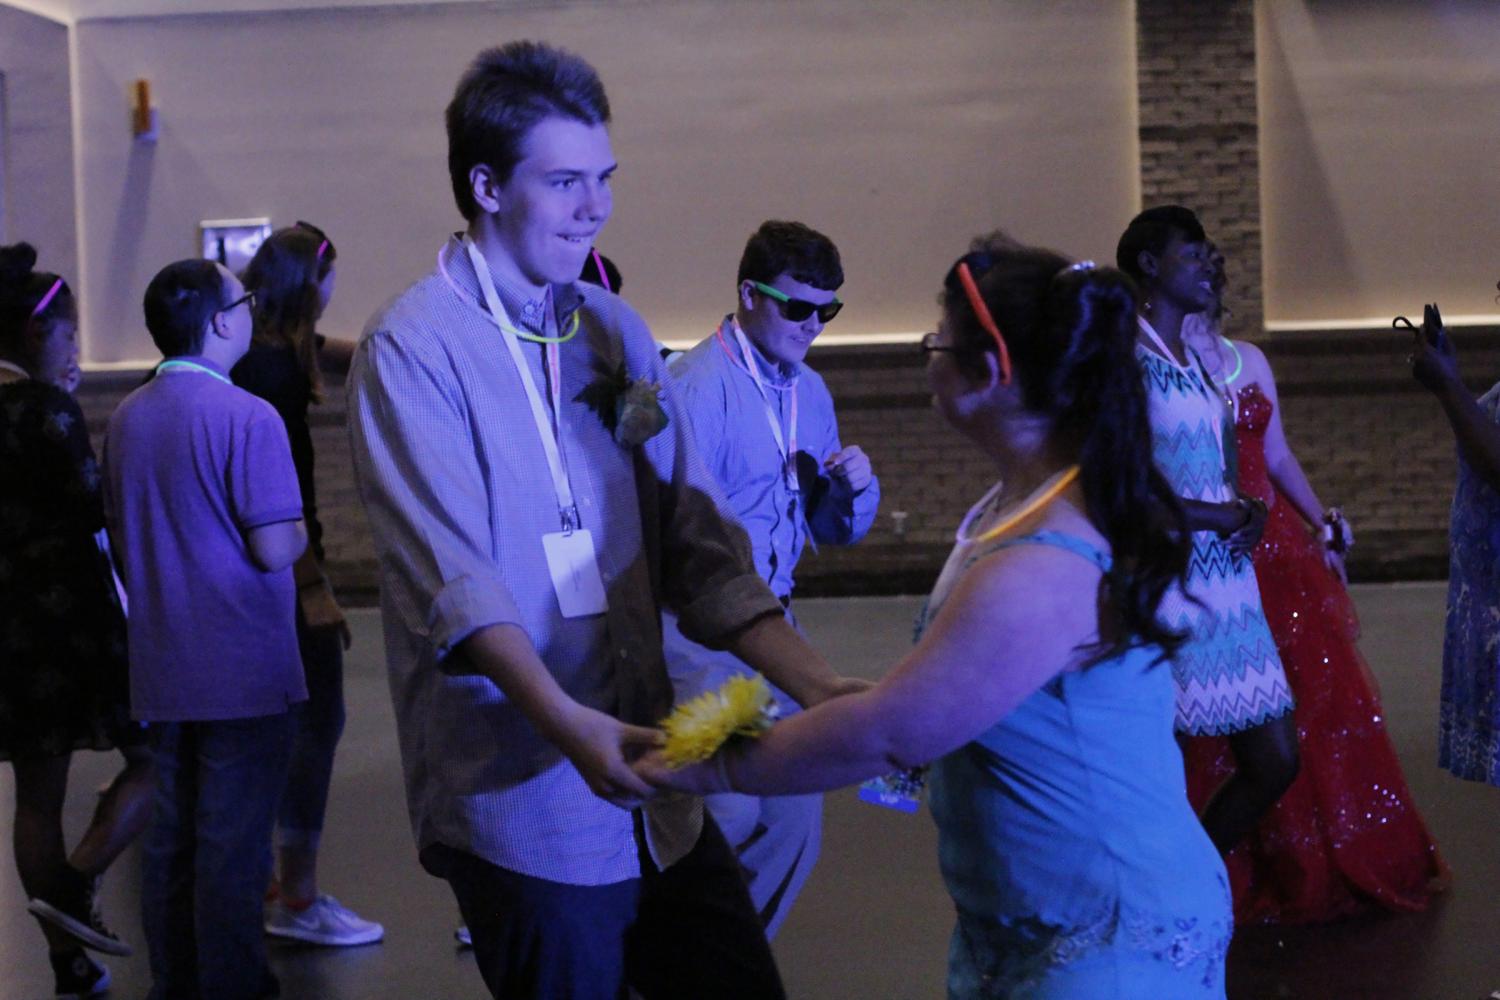 Students+dance+at+special+needs+prom.+Around+300+students+from+towns+all+across+East+Texas+took+part+in+the+dance.